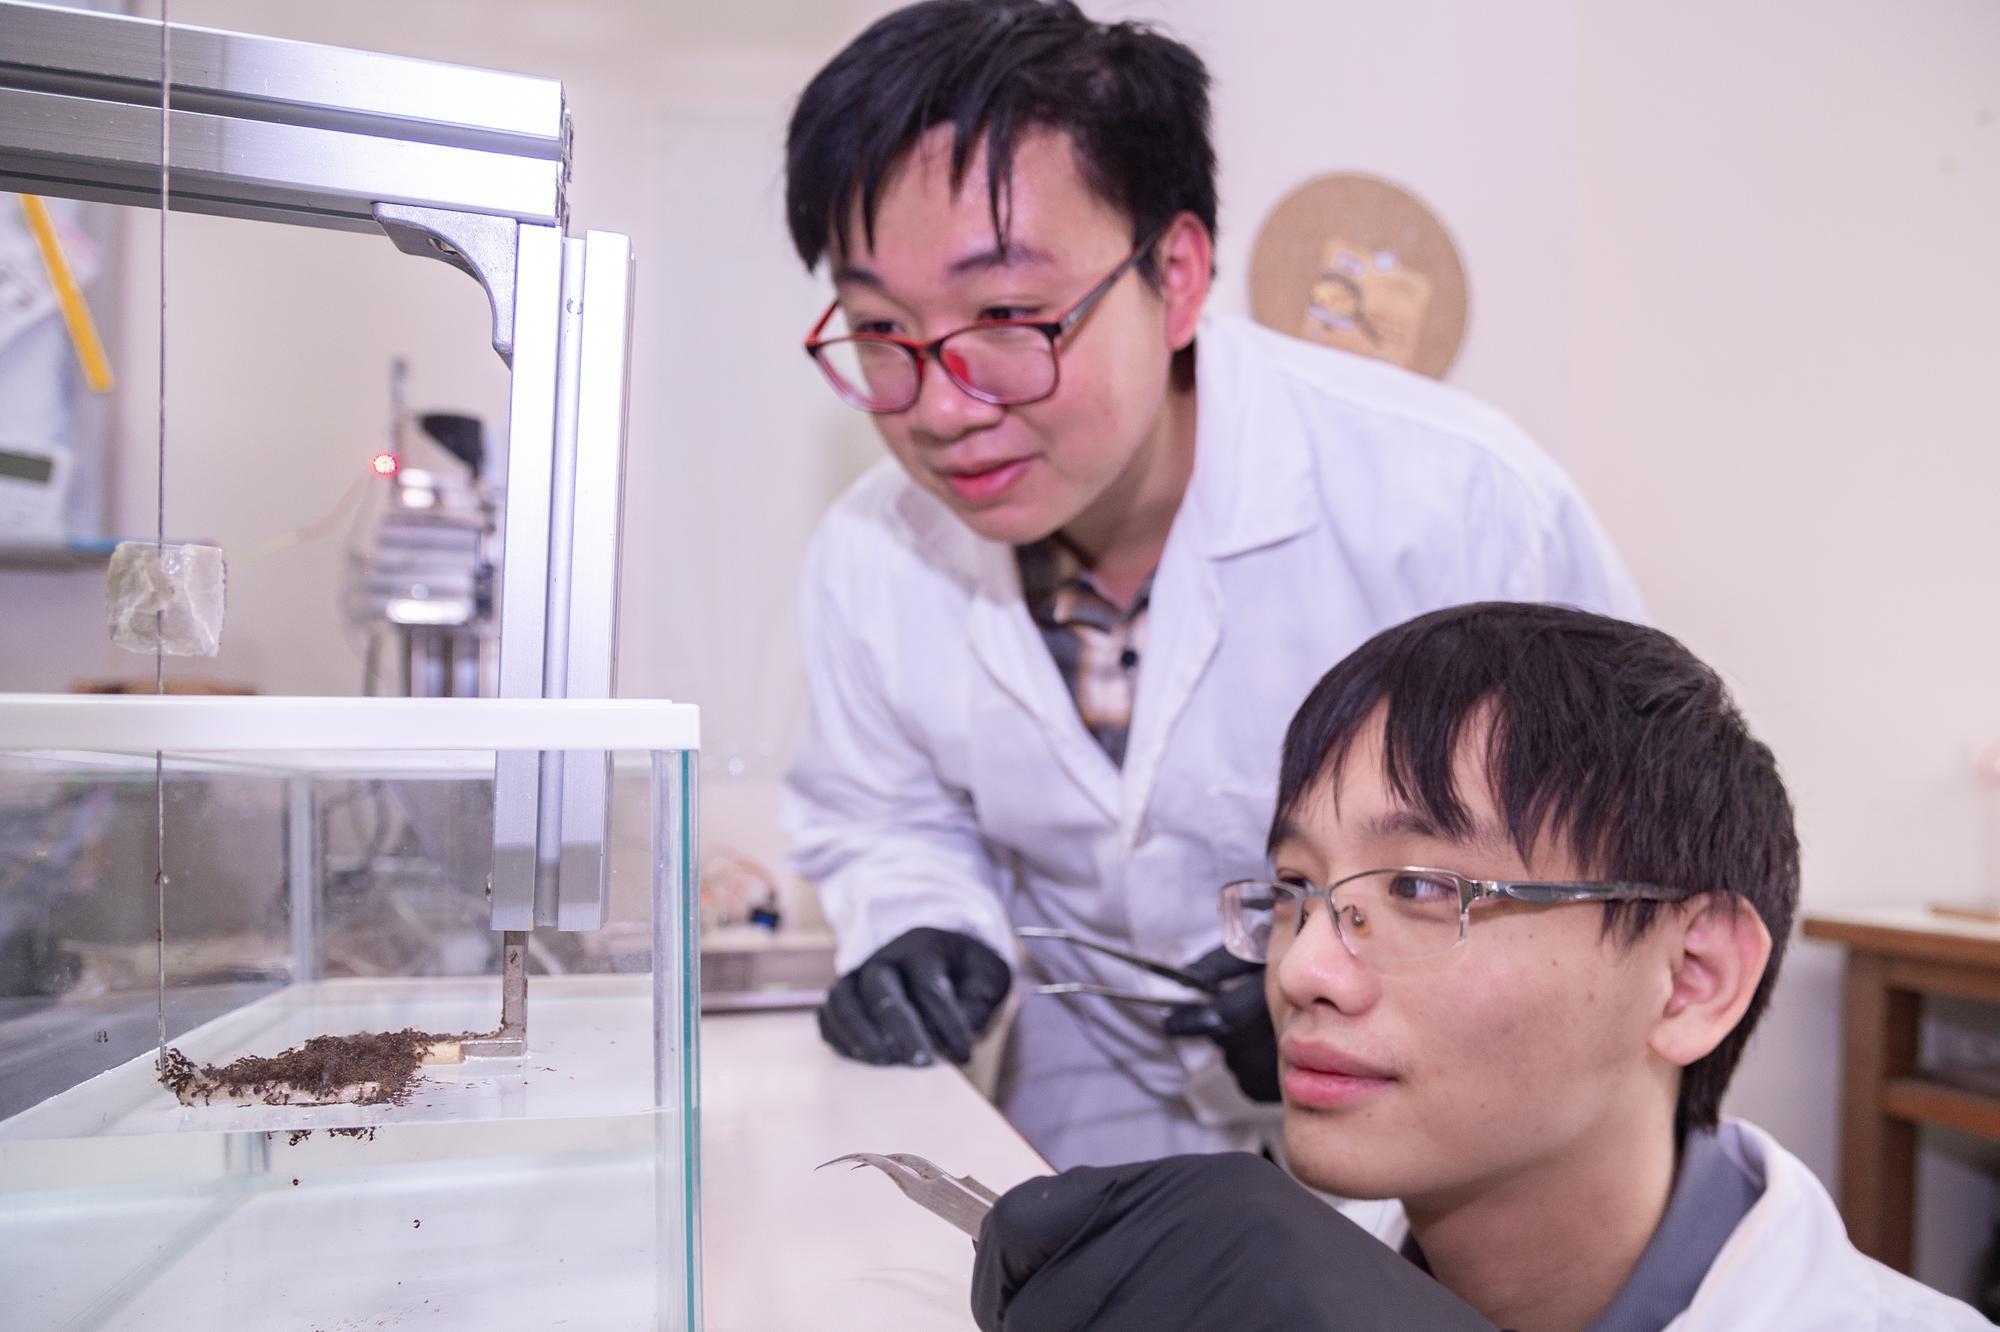 Ph.D. student Chung-Hao Chen (陳中皓) (left) and Master's student Ting-Heng Hsieh (謝廷珩) (right), from the Department of Physics at NTHU, observe fire ants rafting on the water's surface.